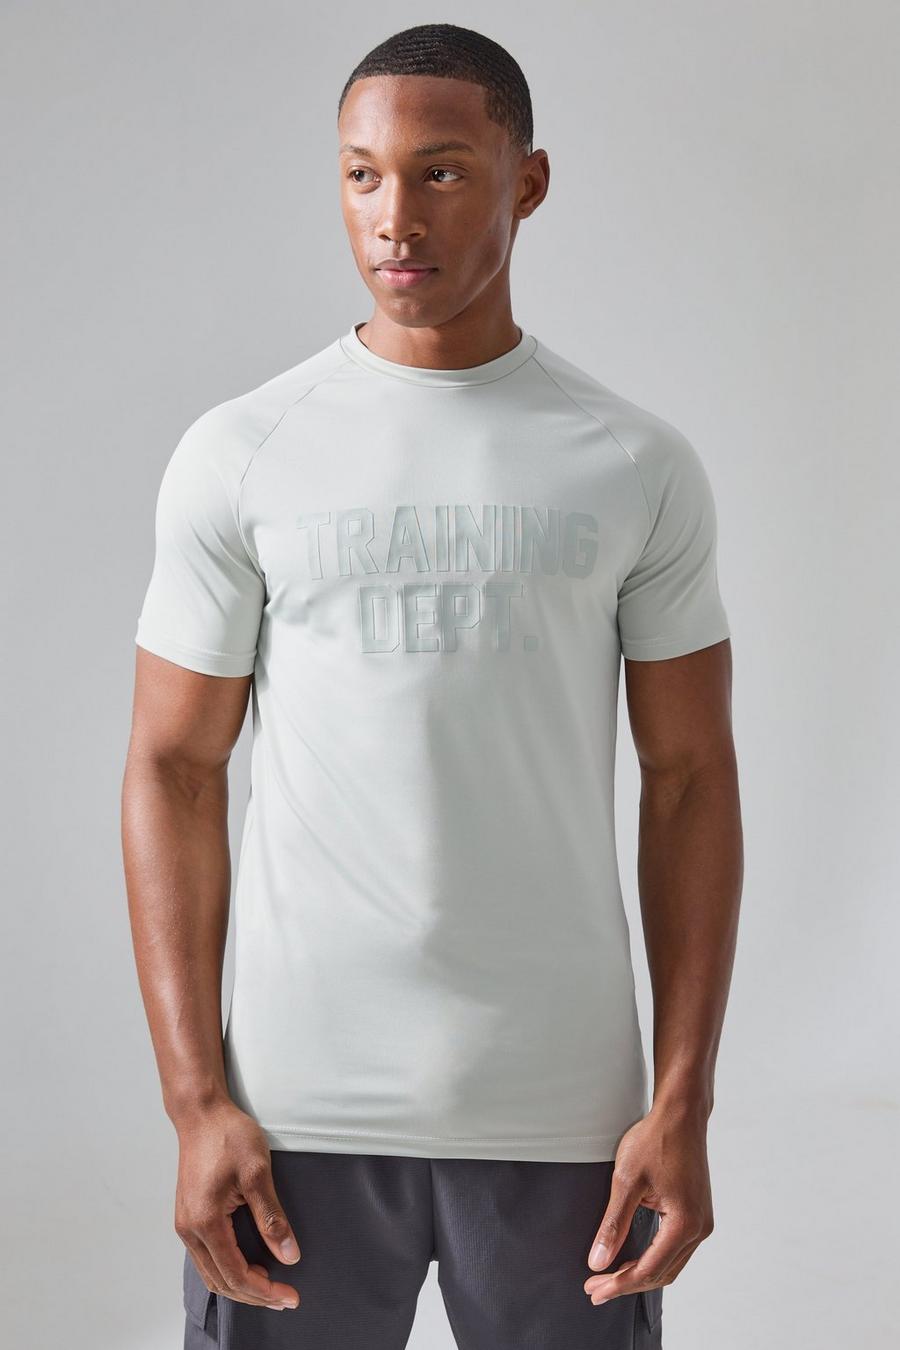 Active Trainings Dept Muscle-Fit T-Shirt, Stone image number 1